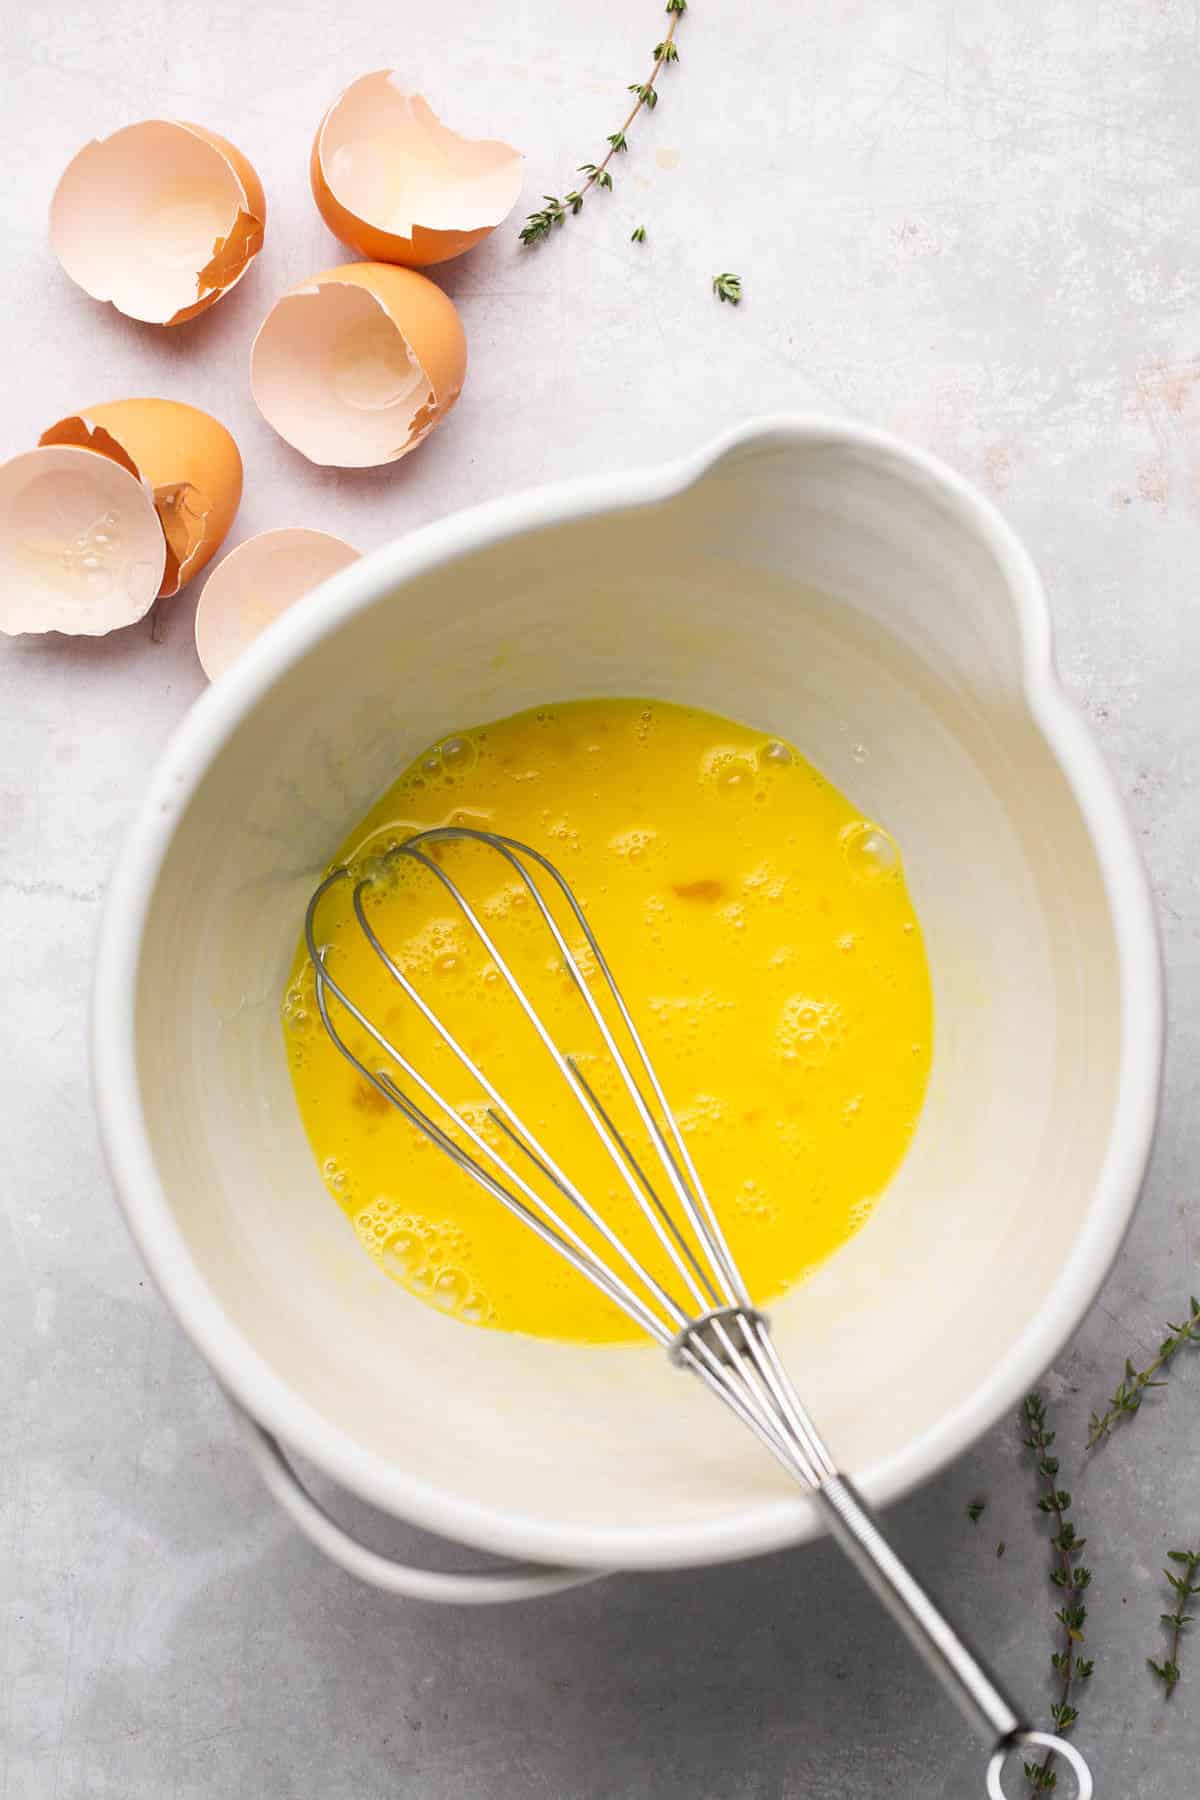 Whisking eggs and egg yolks in a large bowl.